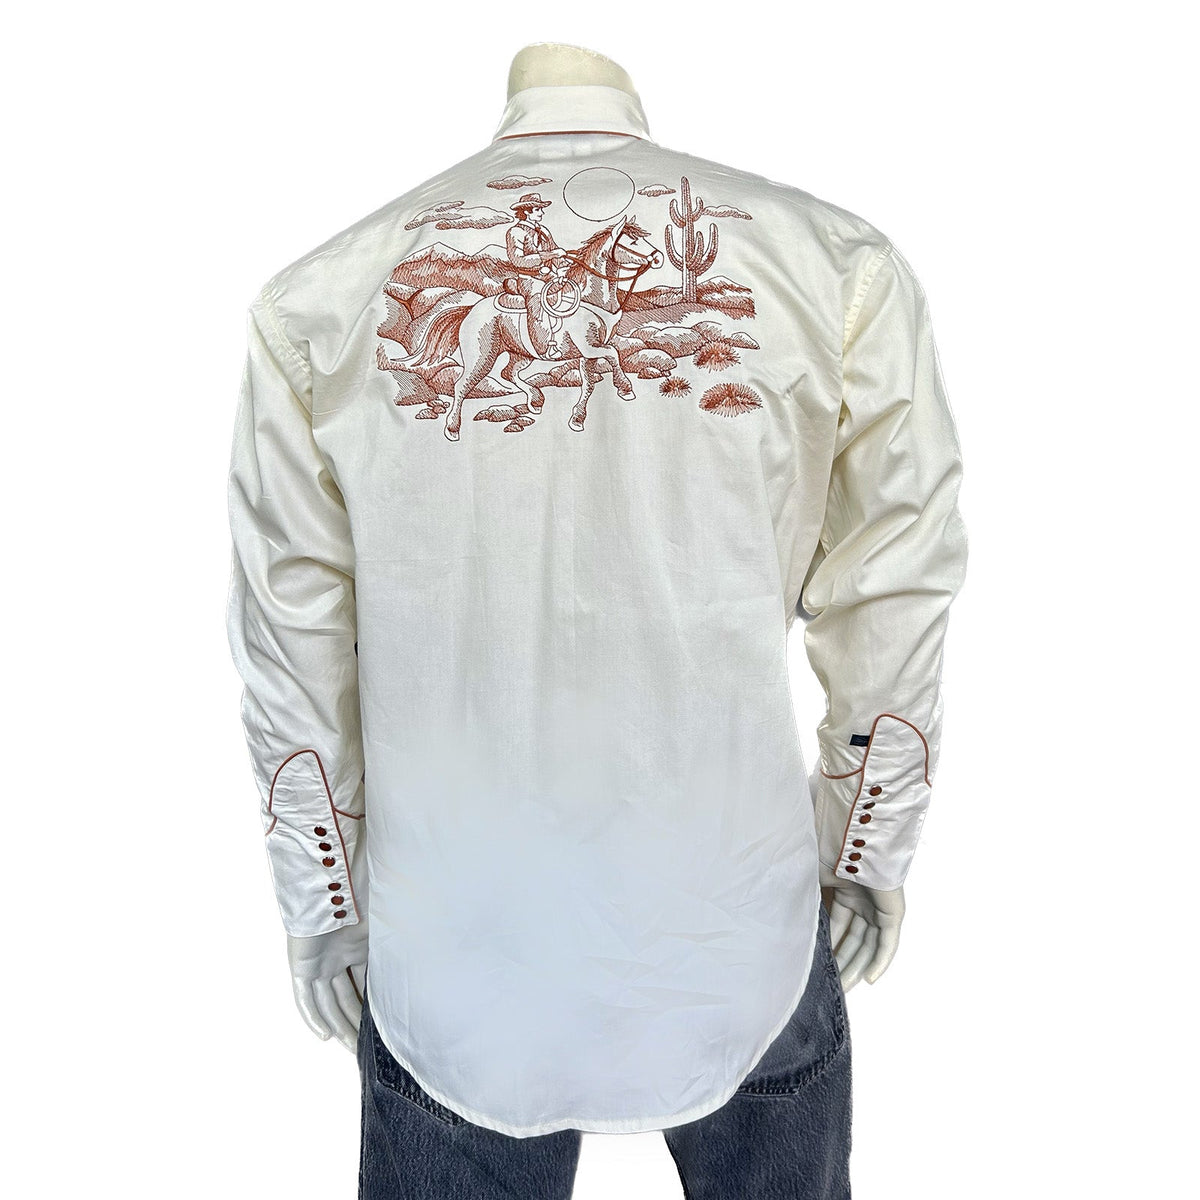 Rockmount Clothing Men's Ivory Vintage Rider Western Embroidery